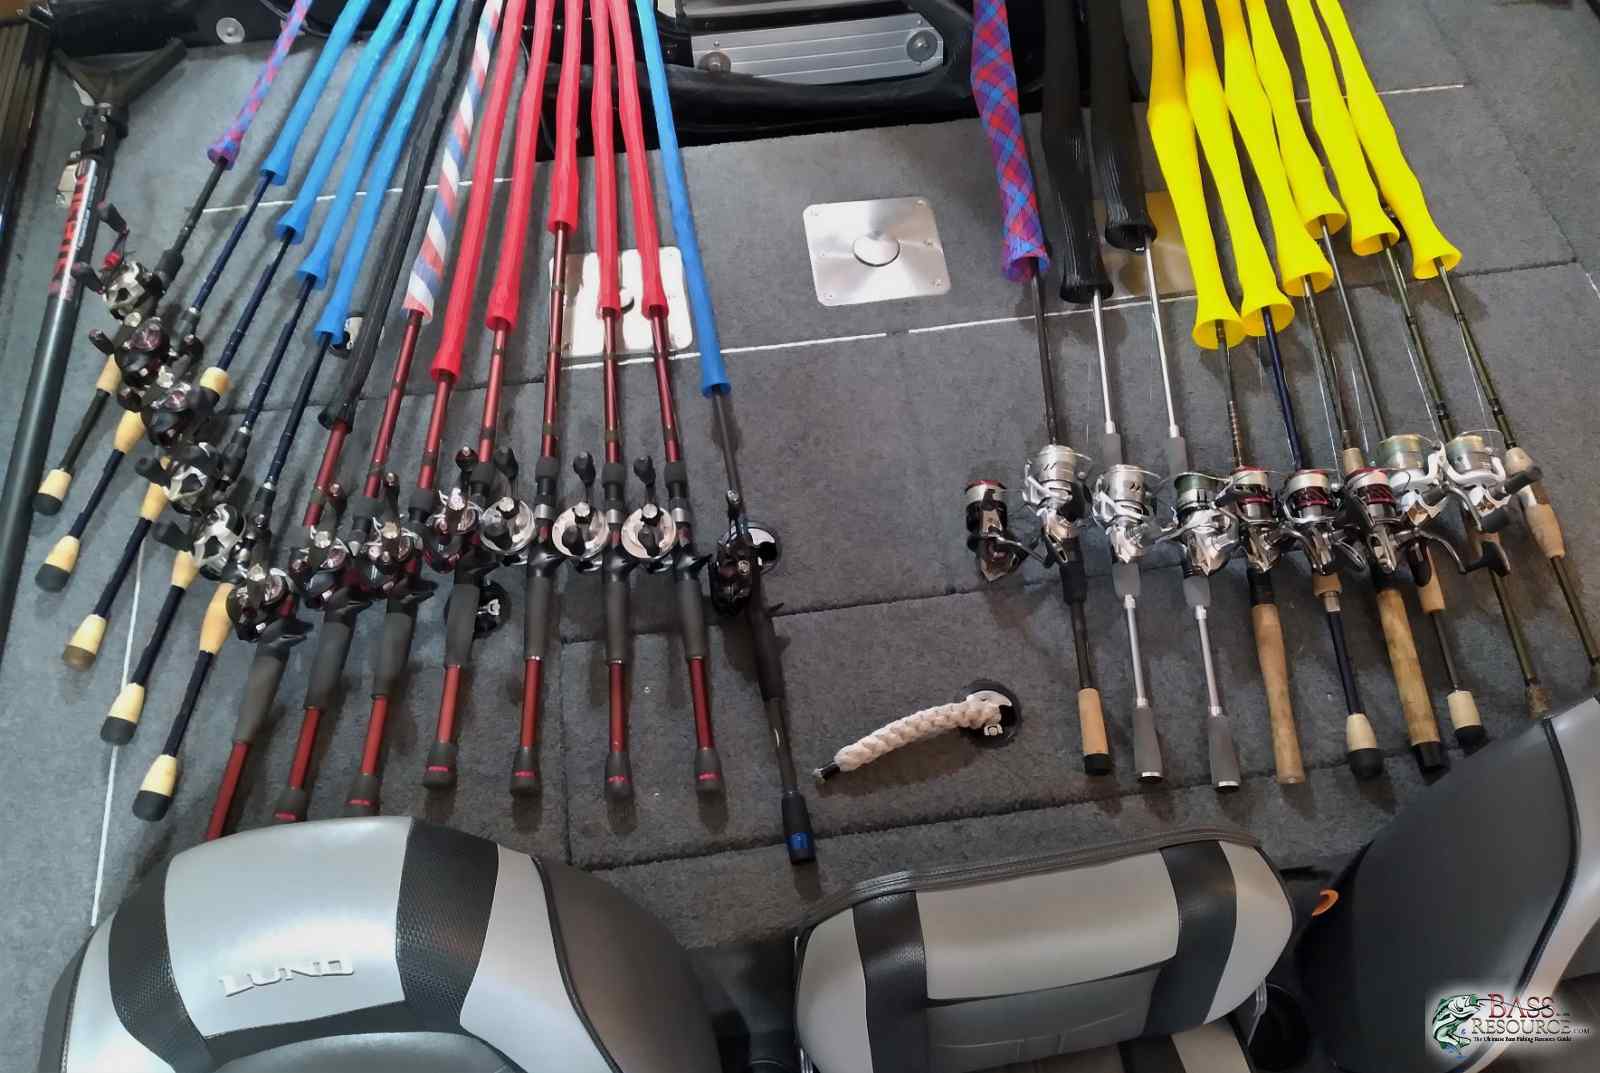 Good tricks to keep track of line size? - Fishing Rods, Reels